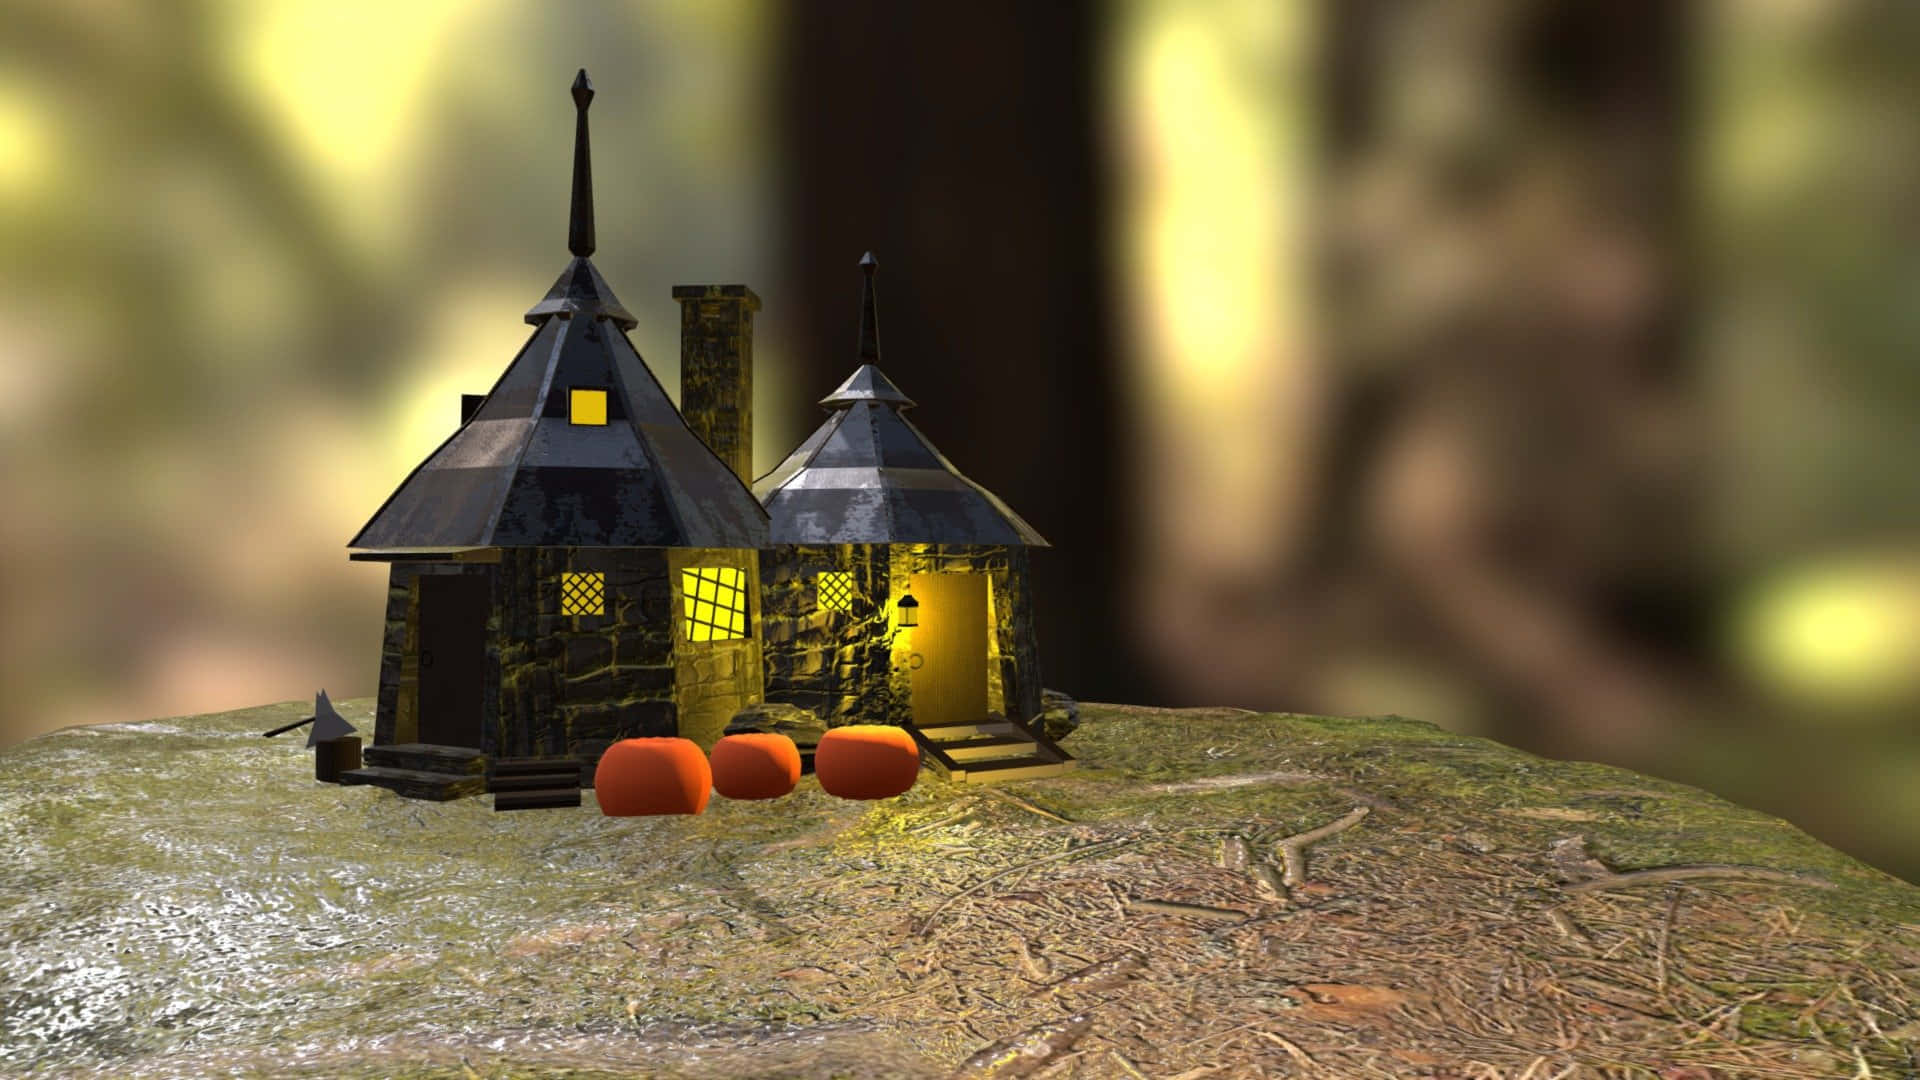 Magical Hagrid's Hut located at Hogwarts School of Witchcraft and Wizardry Wallpaper